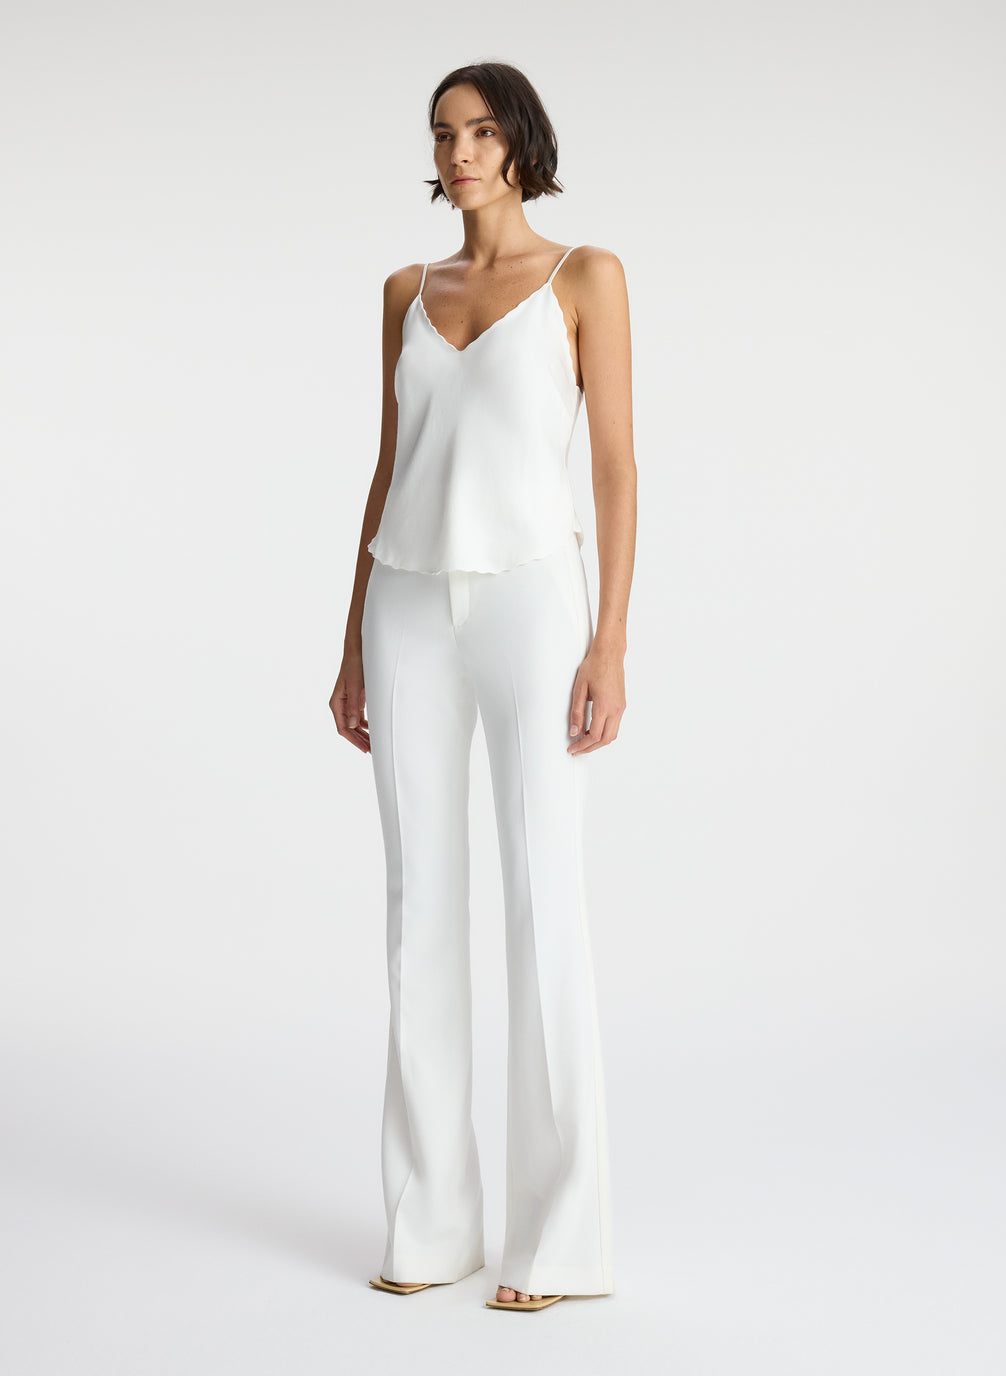 side view of woman wearing white satin camisole and white pants